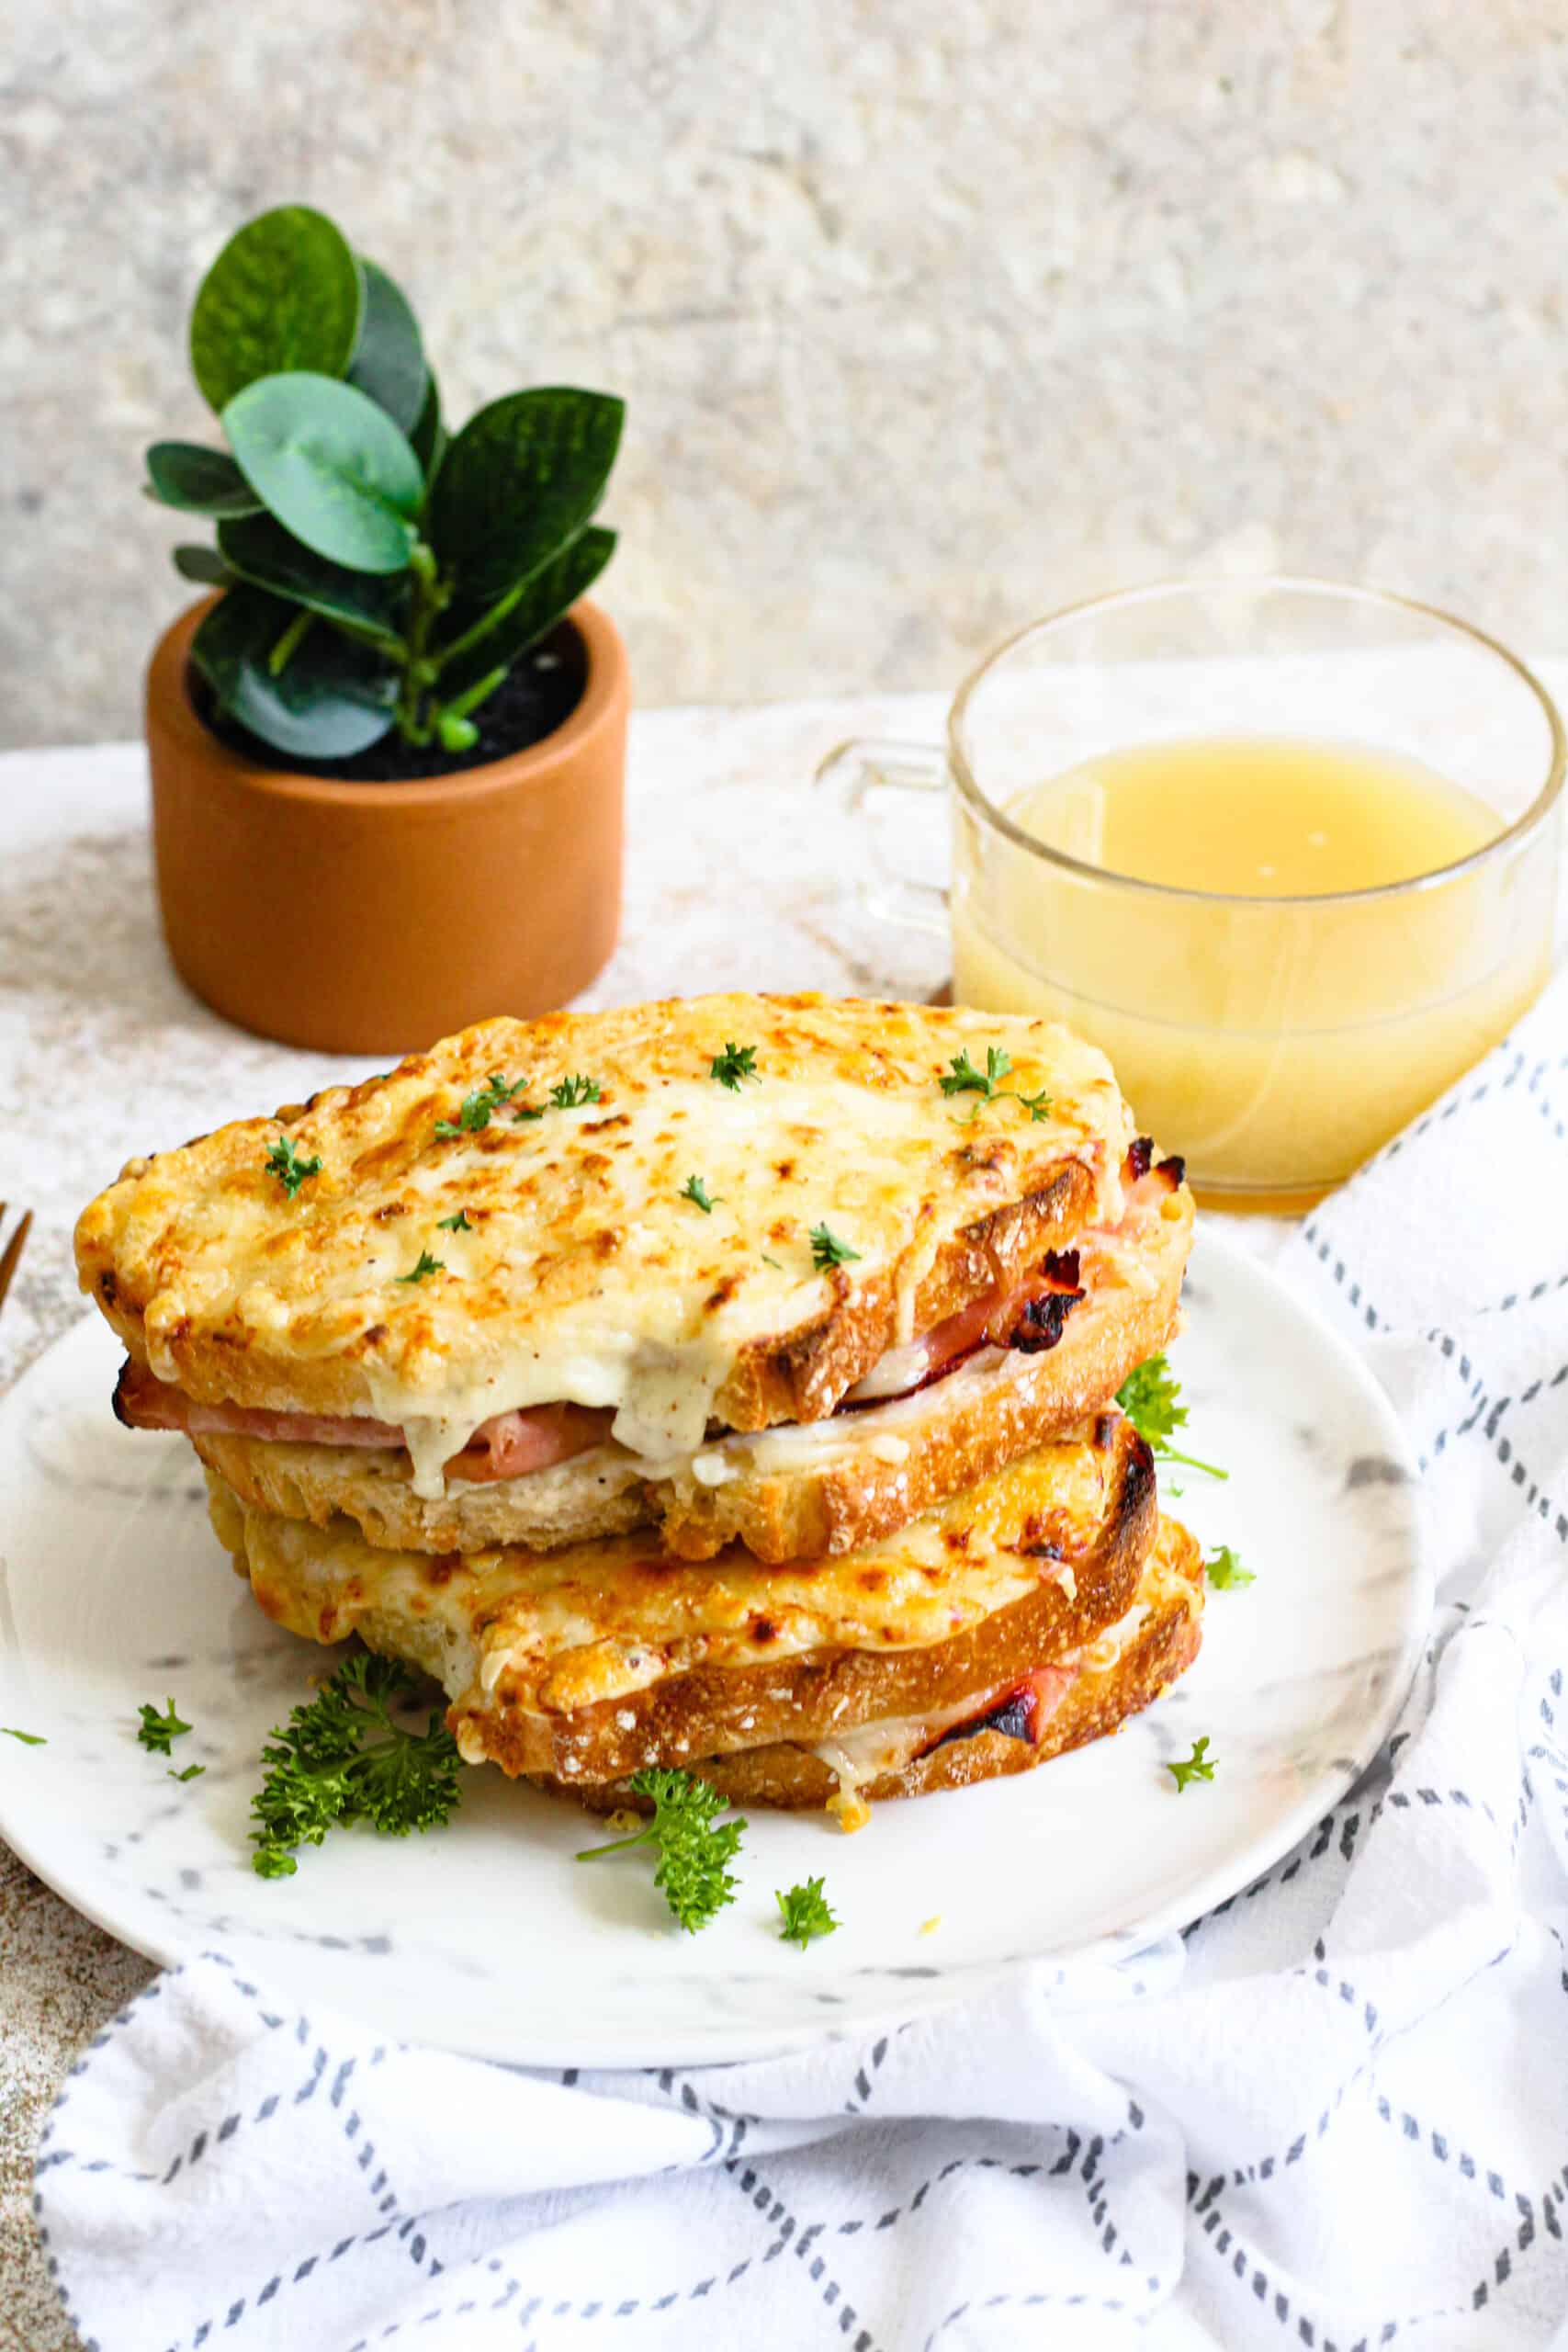 A croque monsieur sandwich on a plate with a glass of orange juice. 